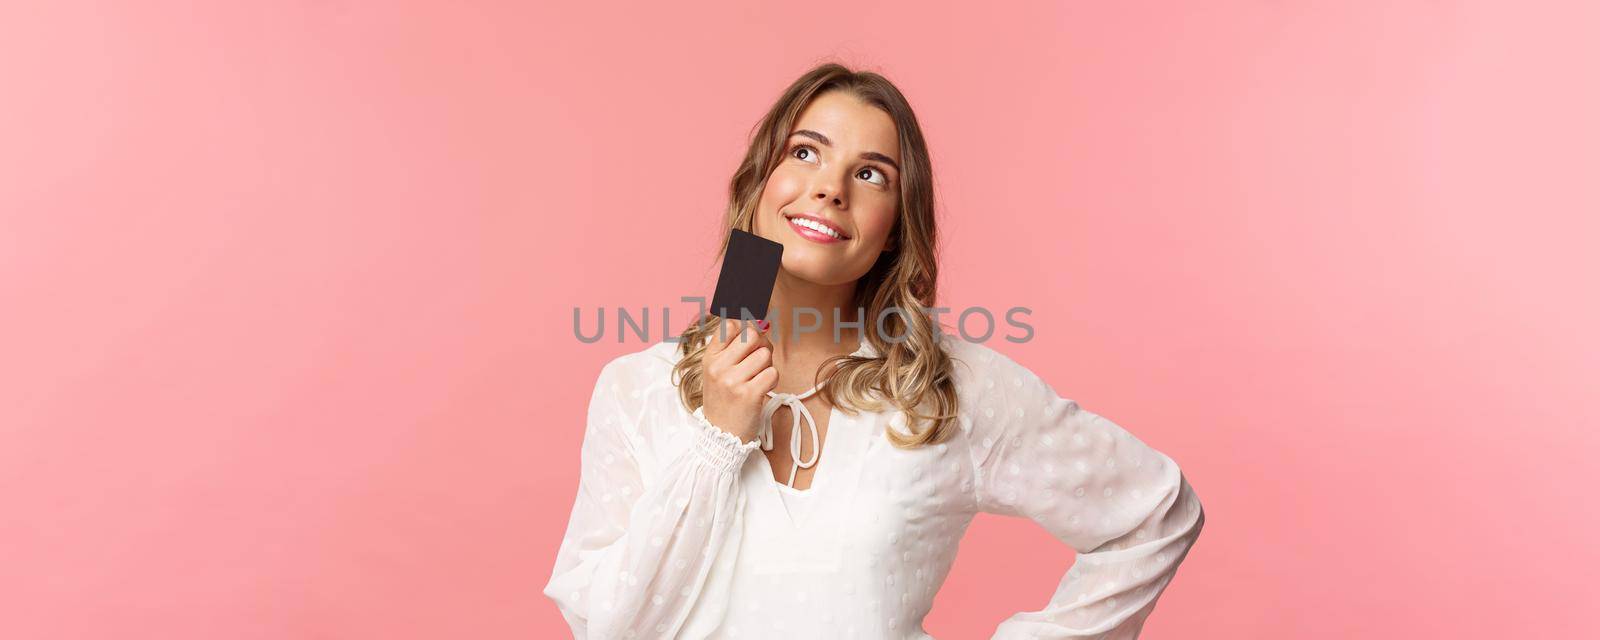 Close-up portrait of thoughtful and creative blond woman in white dress, touching chin with credit card and smiling dreamy as looking up and thinking, picturing what buy as present, pink background.